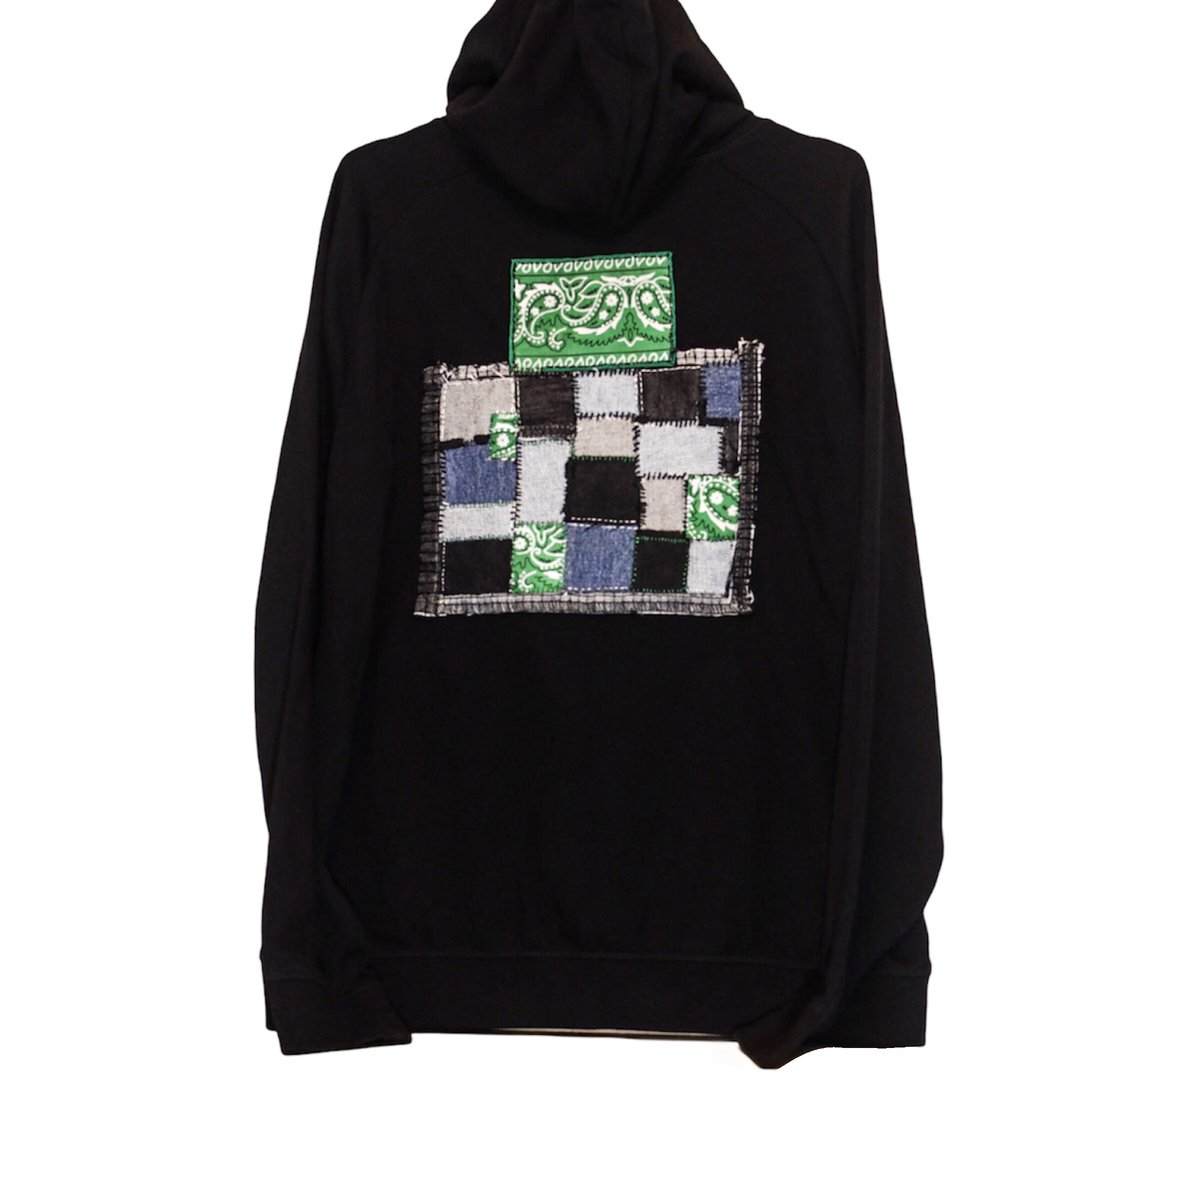 Image of RZN by RB "Emeralded" 1/1 pullover black hoodie